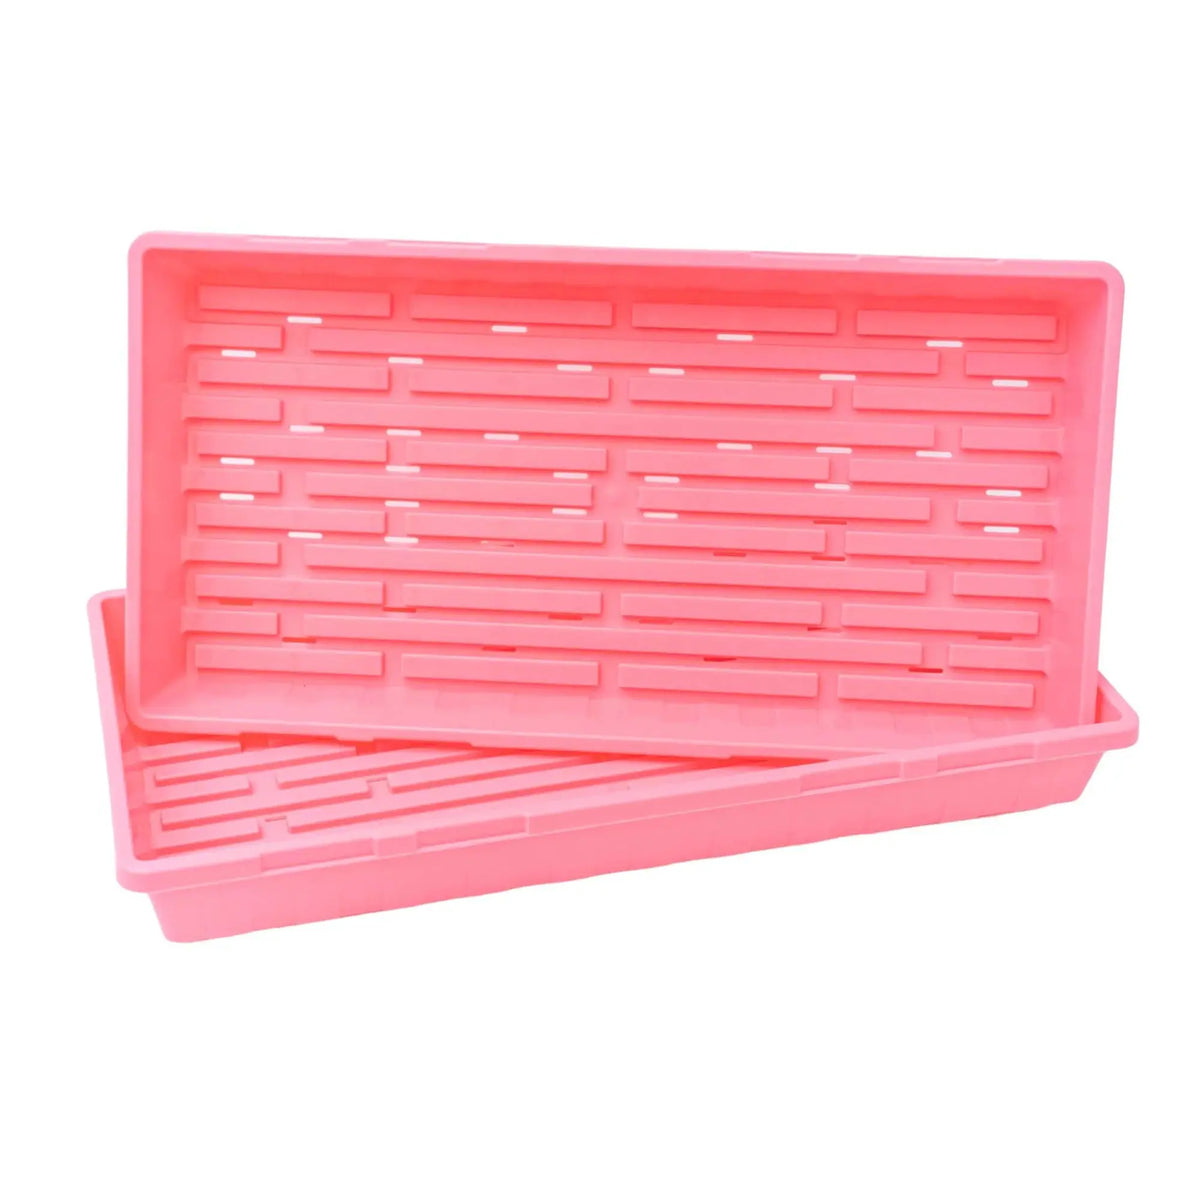 Bootstrap Farmer 1020 Seed Starting Trays | Assorted Colors